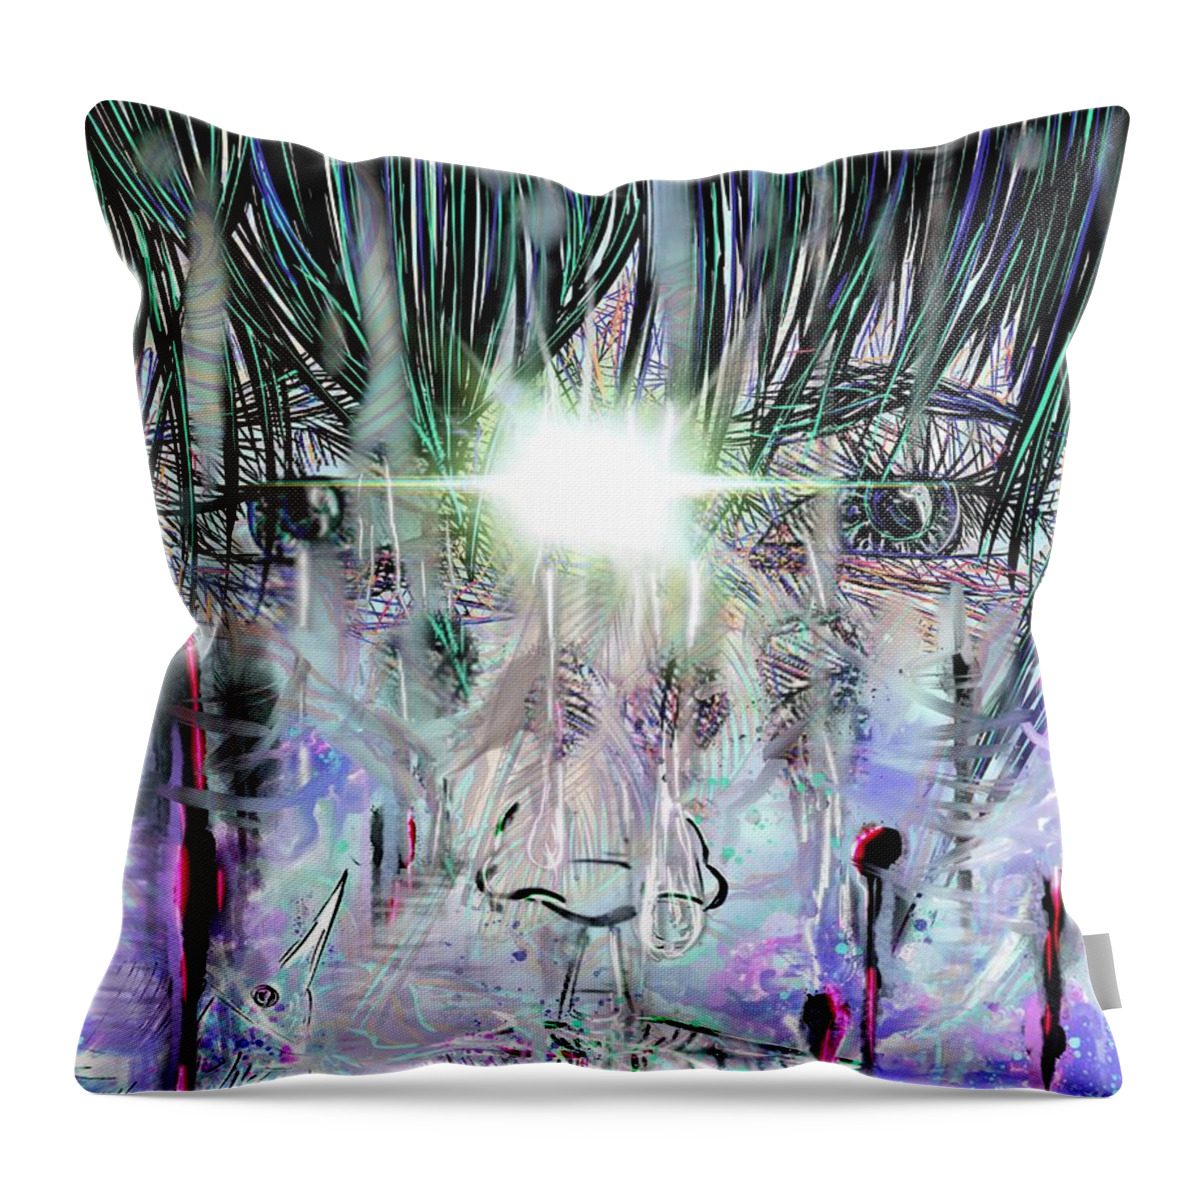 Aware Throw Pillow featuring the digital art Aware by Angela Weddle